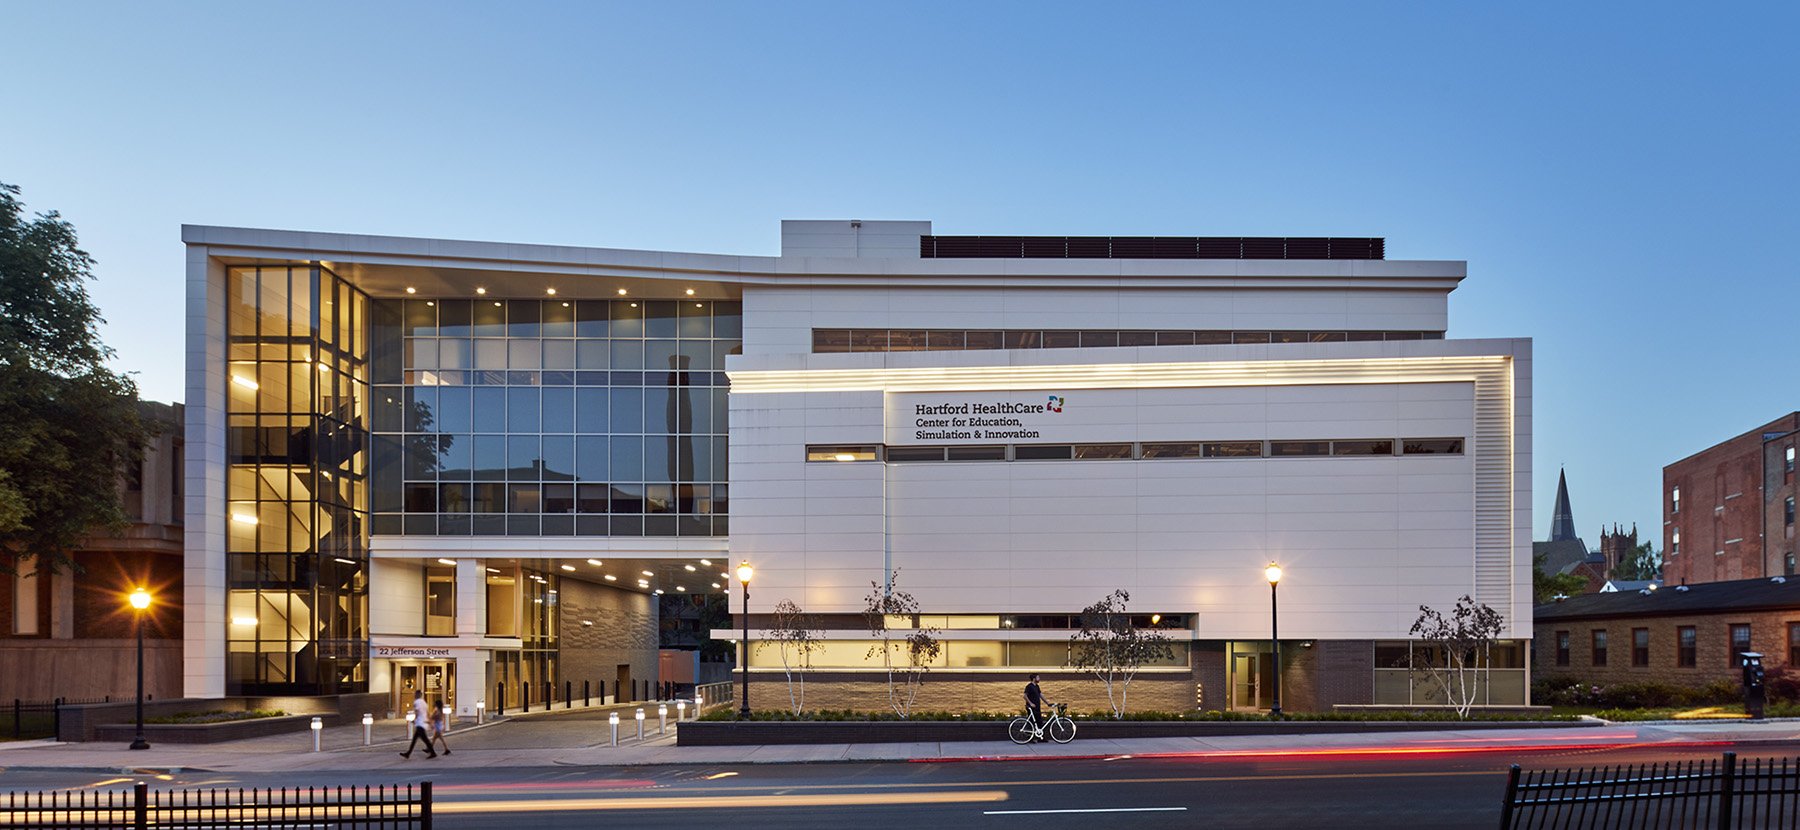 Hartford HealthCare / Center for Education, Simulation & Innovation - Tecton Architects